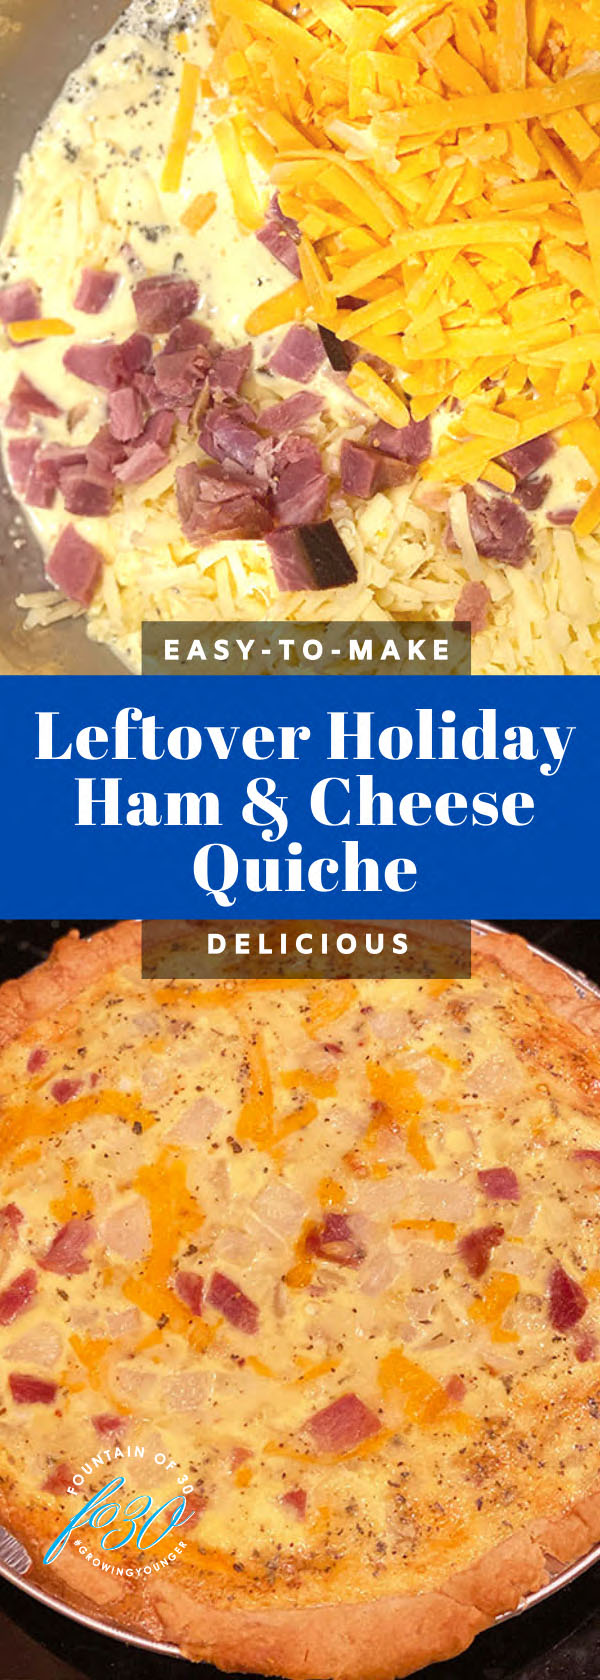 leftover holiday ham and cheese quiche fountainof30